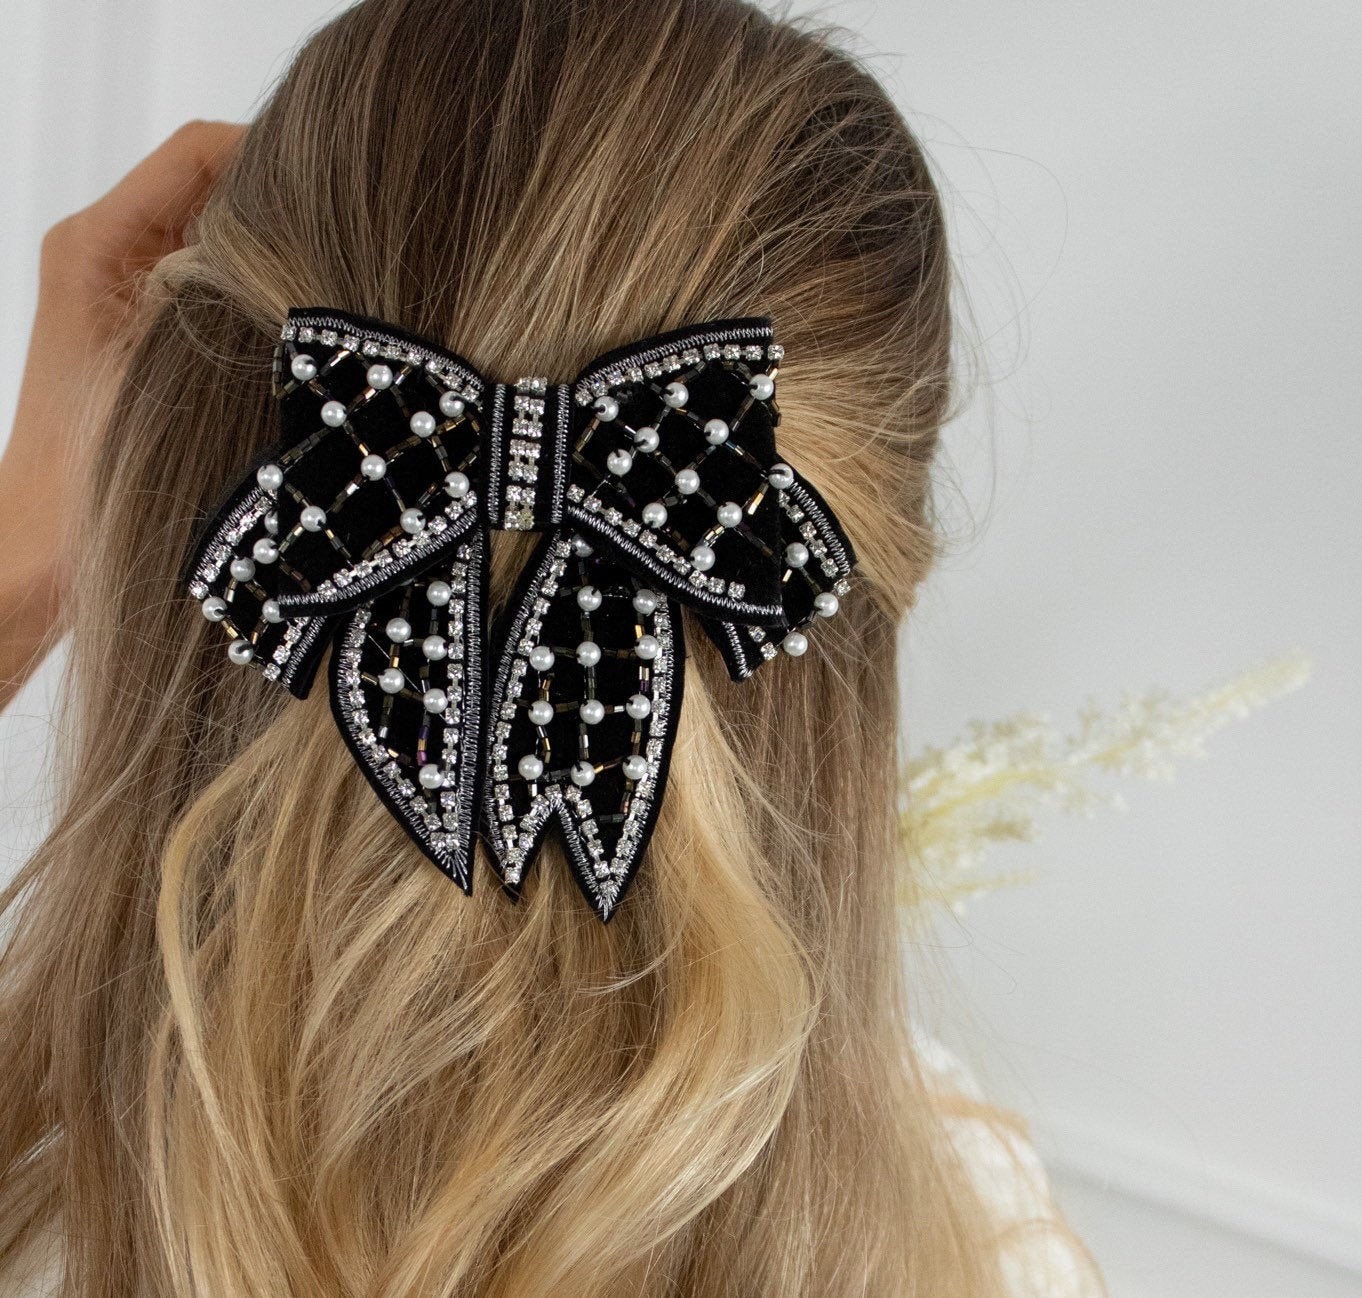 Chanel Hair Accessories - Etsy